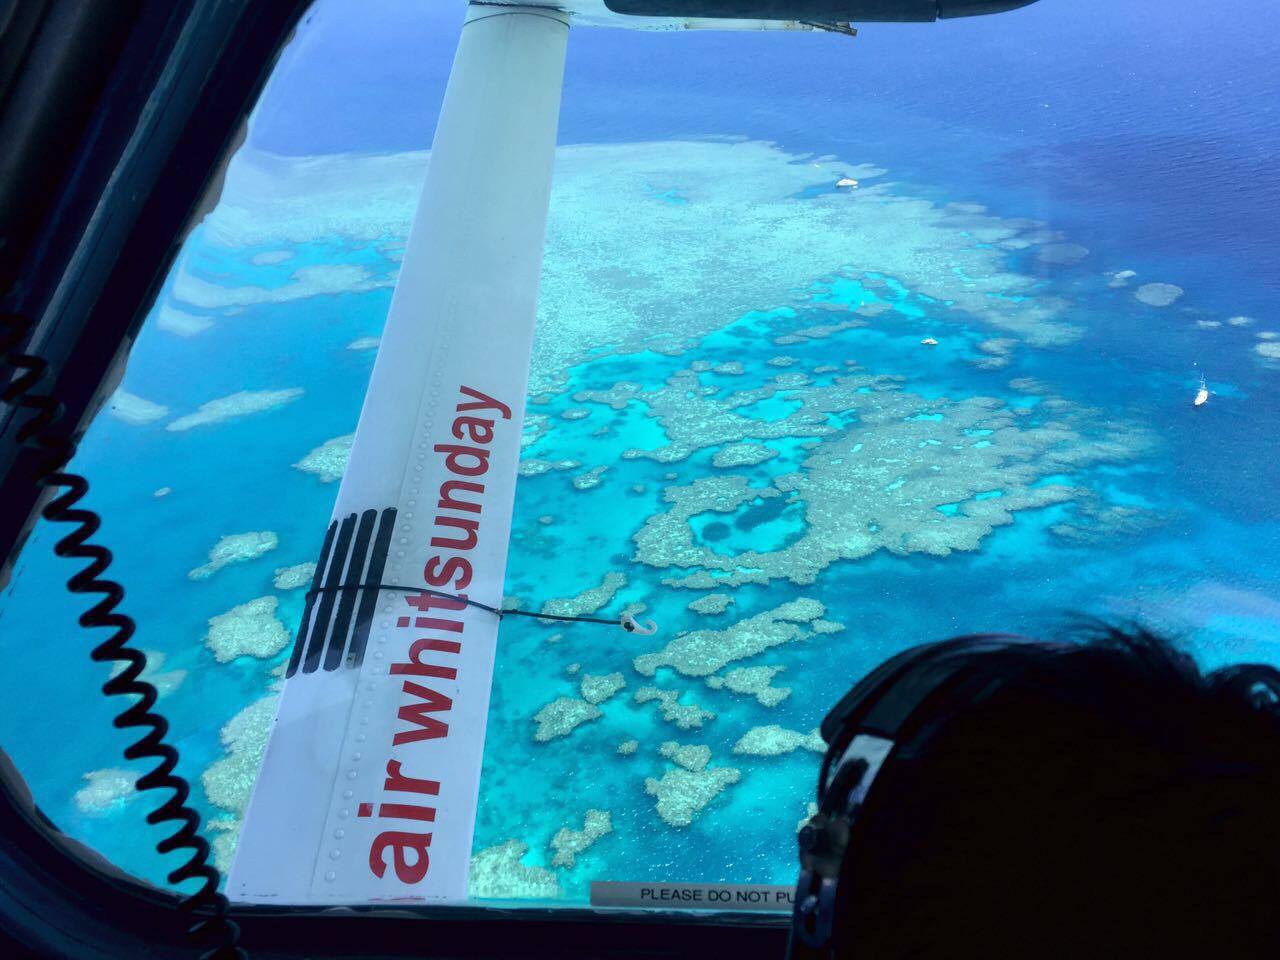  Tour operators will charter seaplanes to fly guests over the reef. The colors are astounding, and changes in depth and darkness depending on the weather and time of day.&nbsp;&nbsp; 